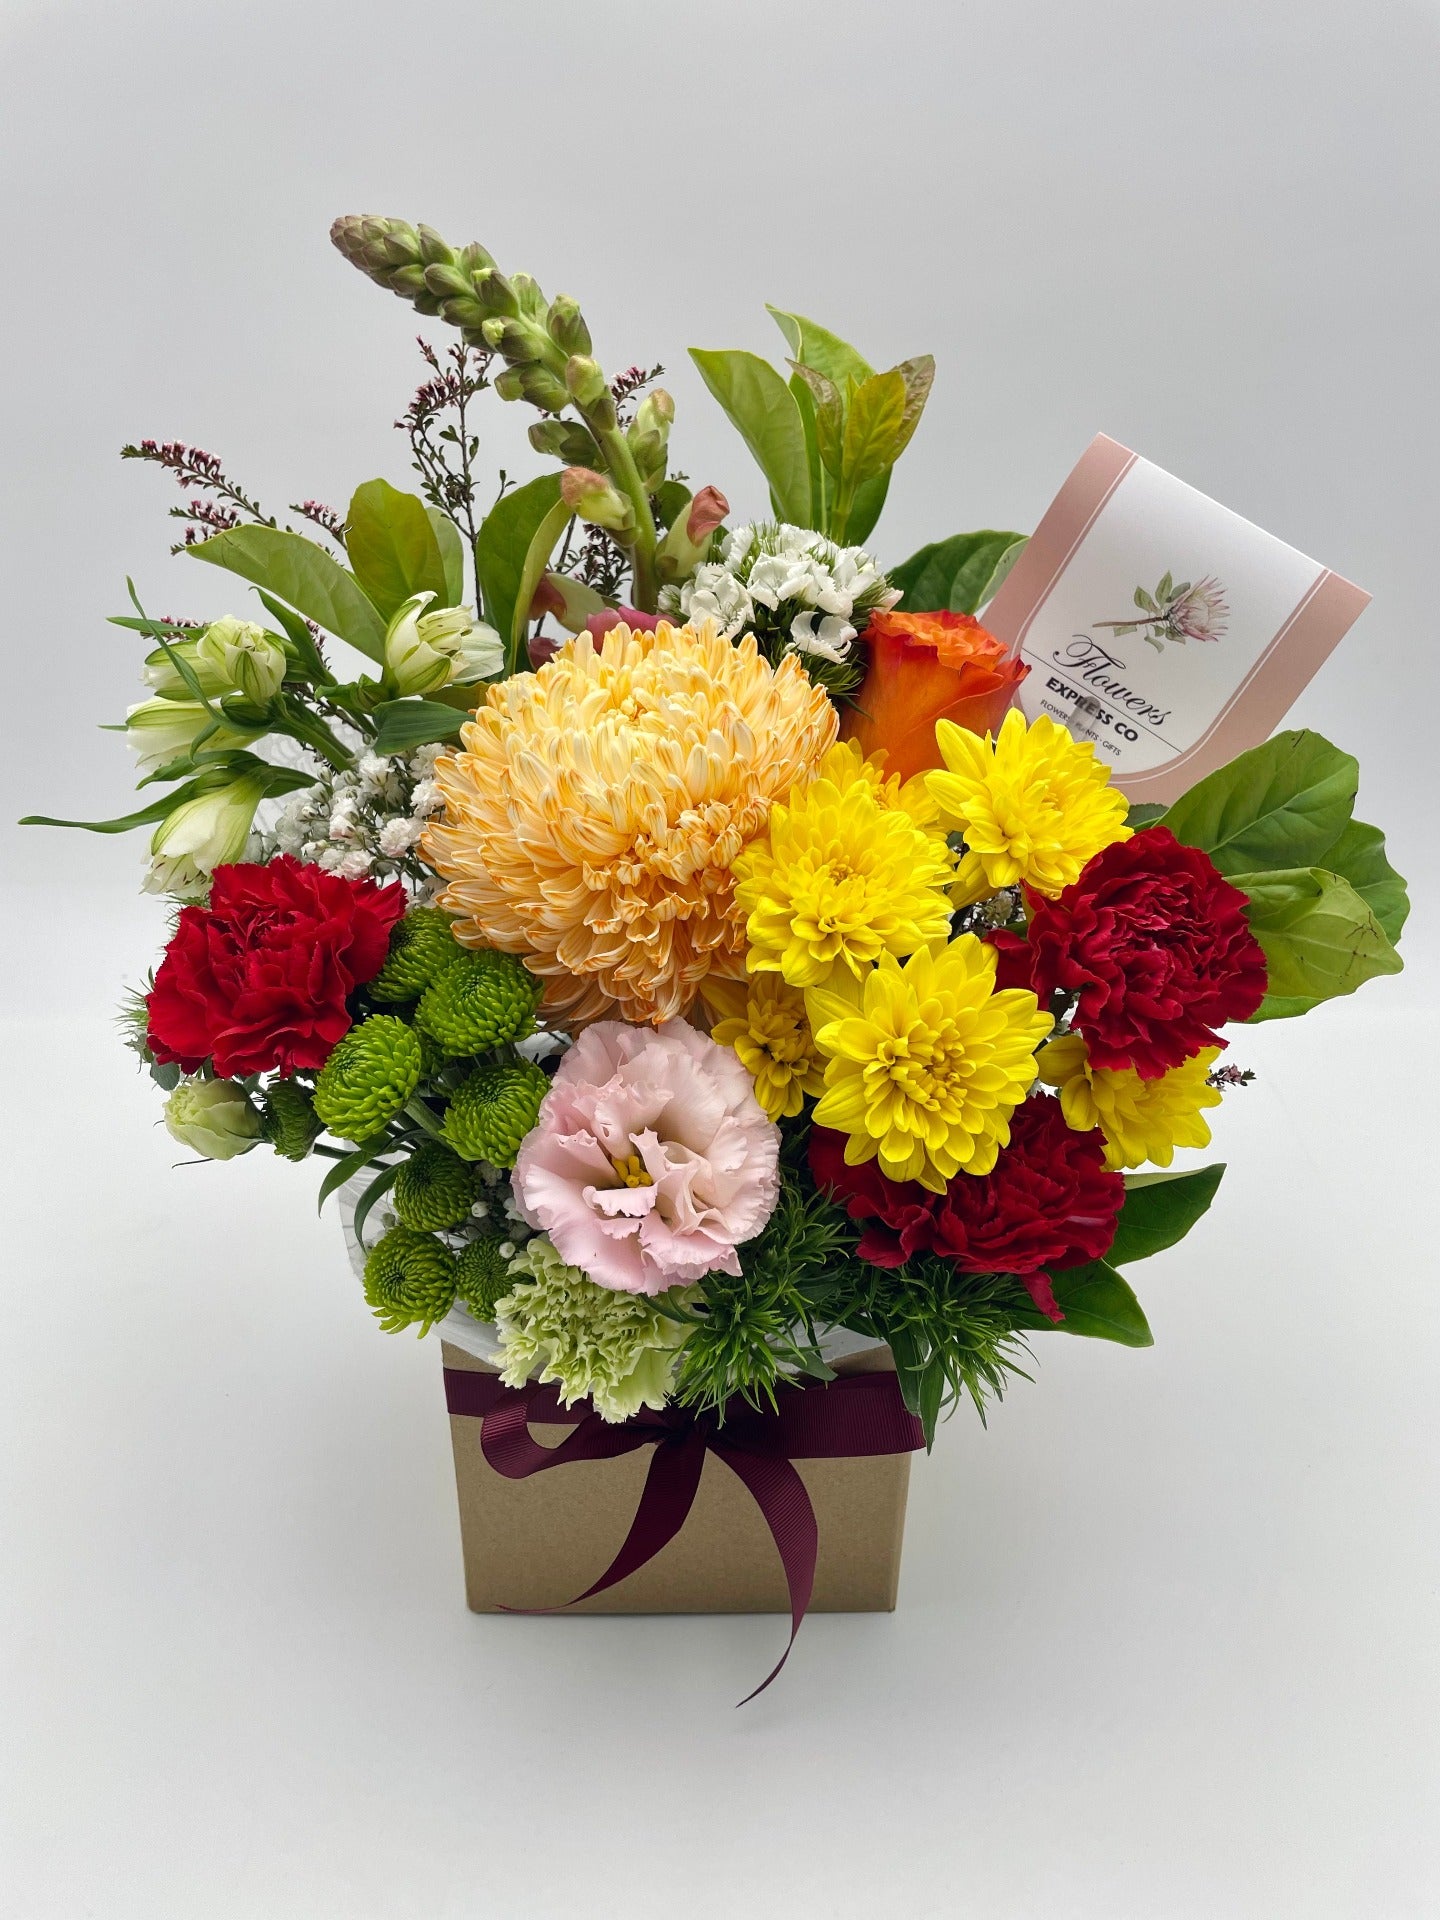 A bouquet of red and orange flowers in a brown carton, made by a florist at Flowers Express Co in Melbourne.